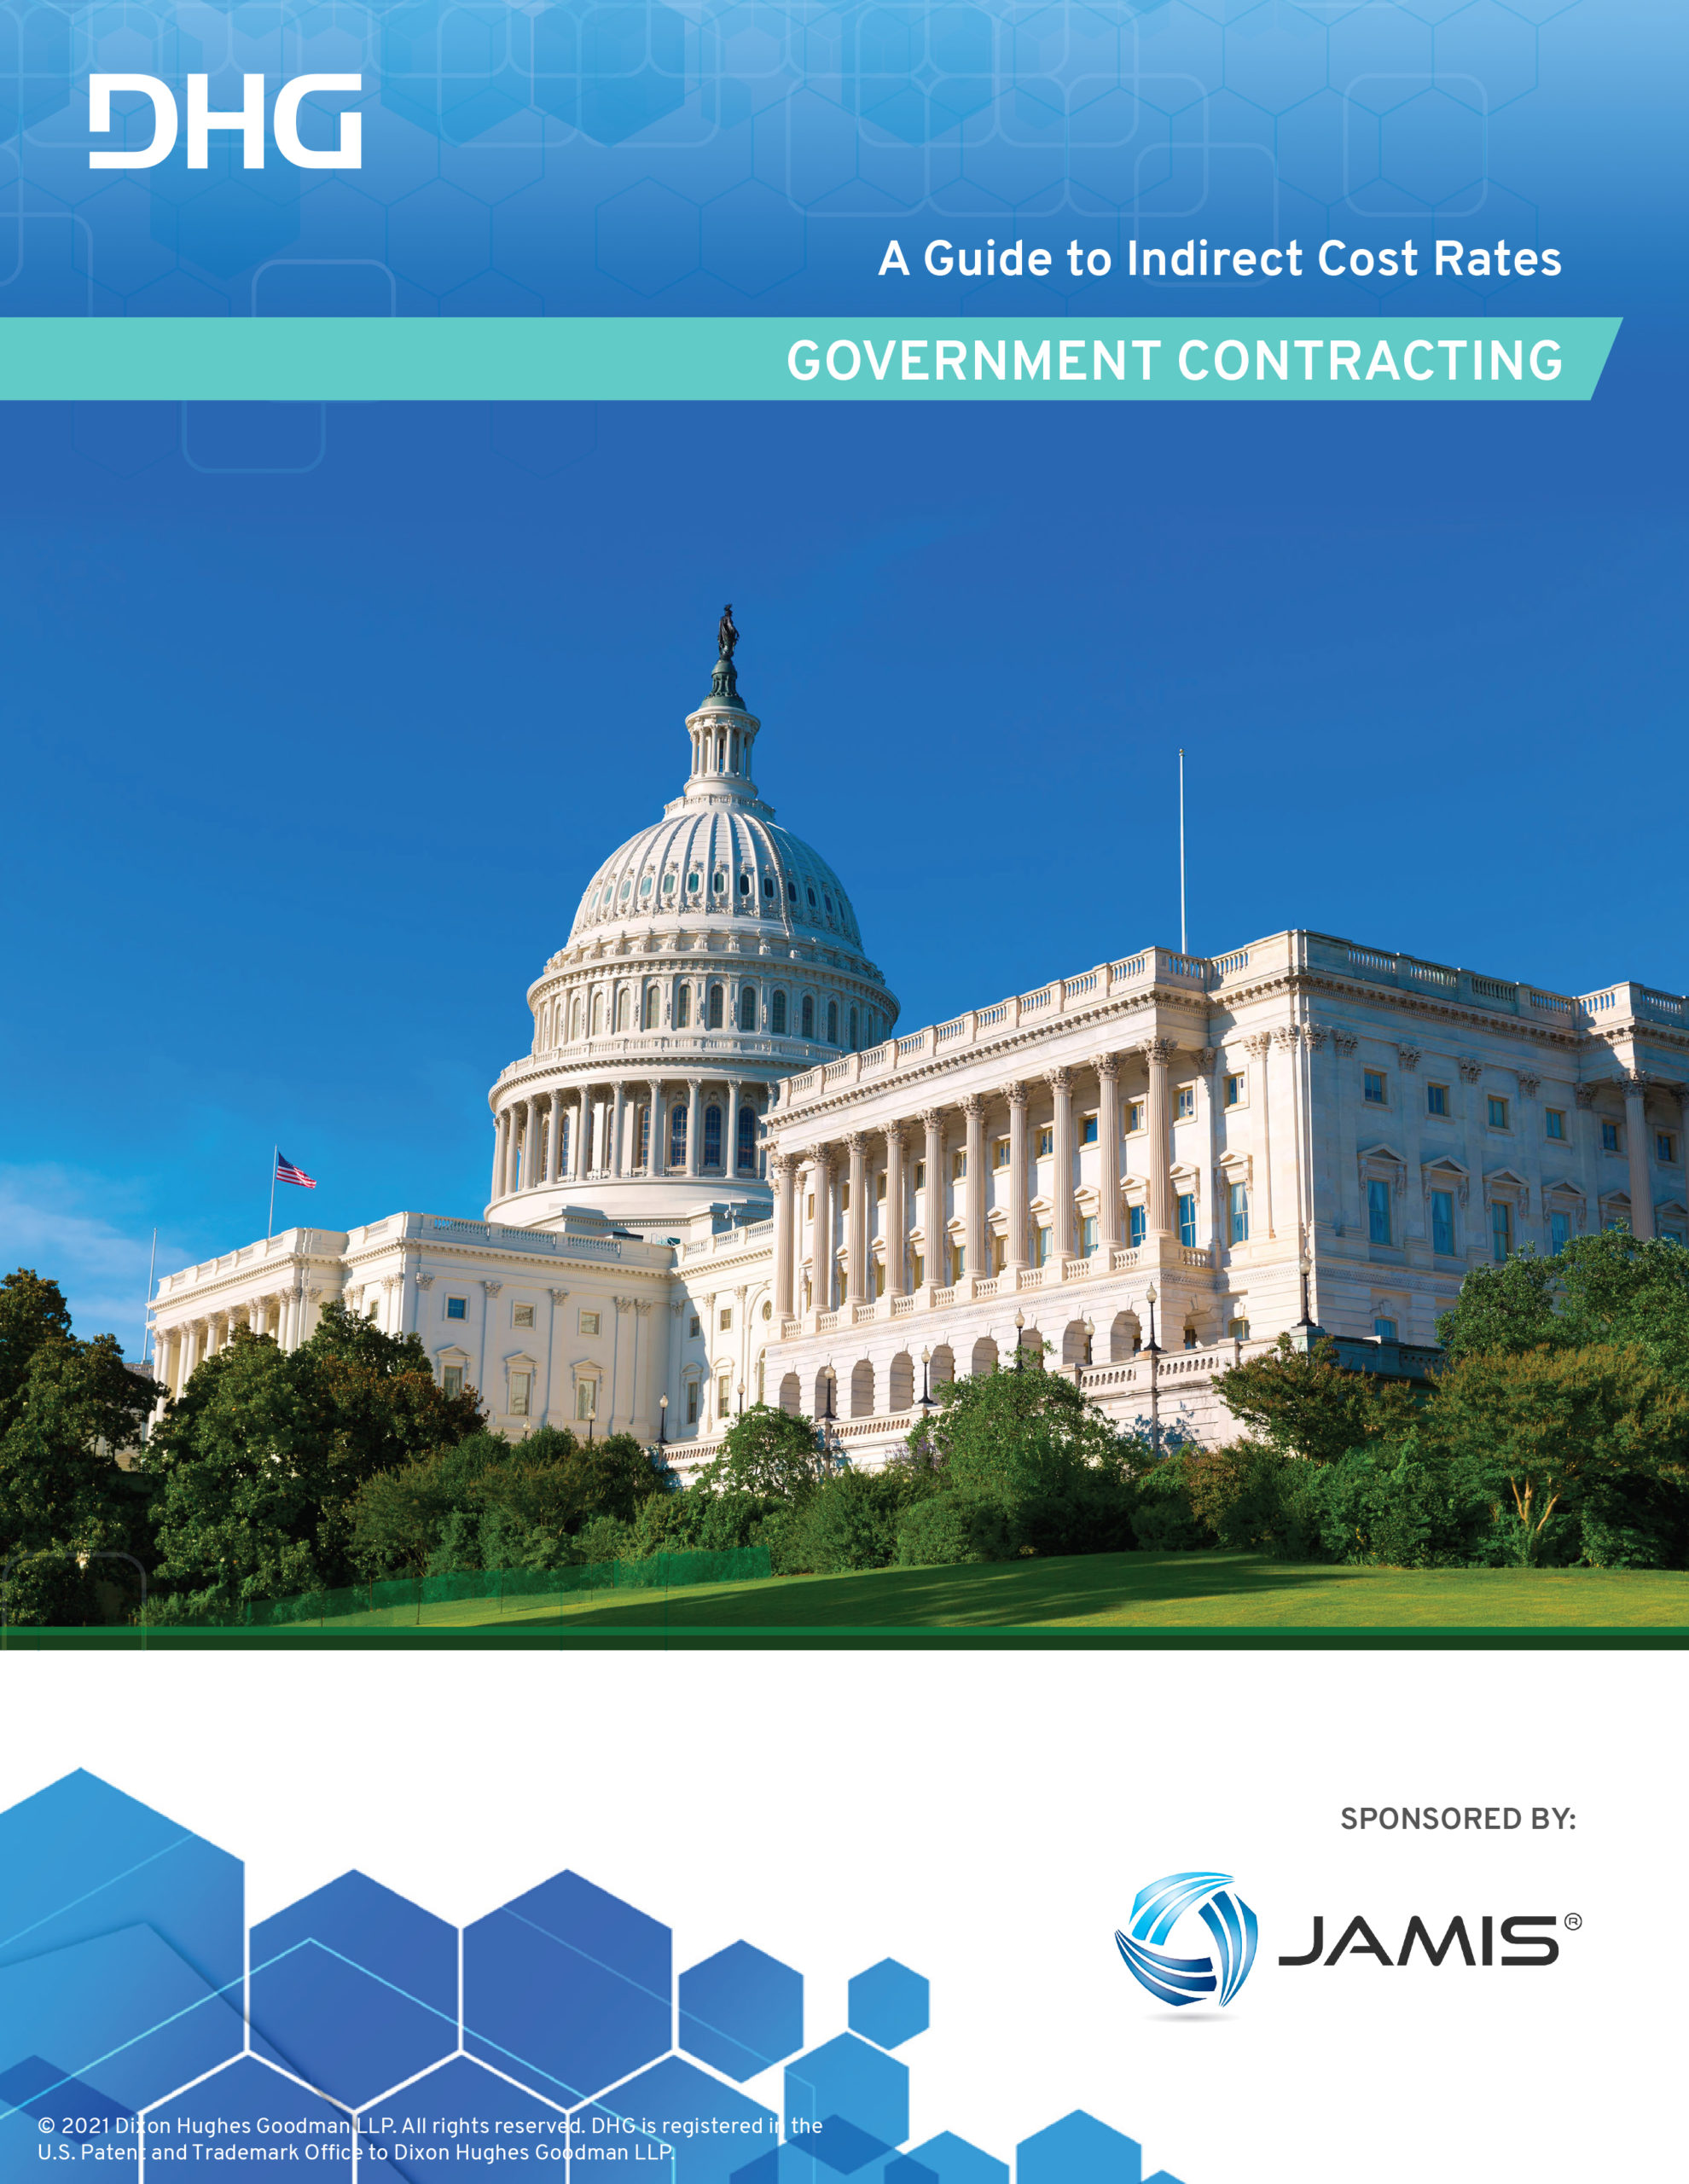 A Guide to Indirect Cost Rates in Government Contracting